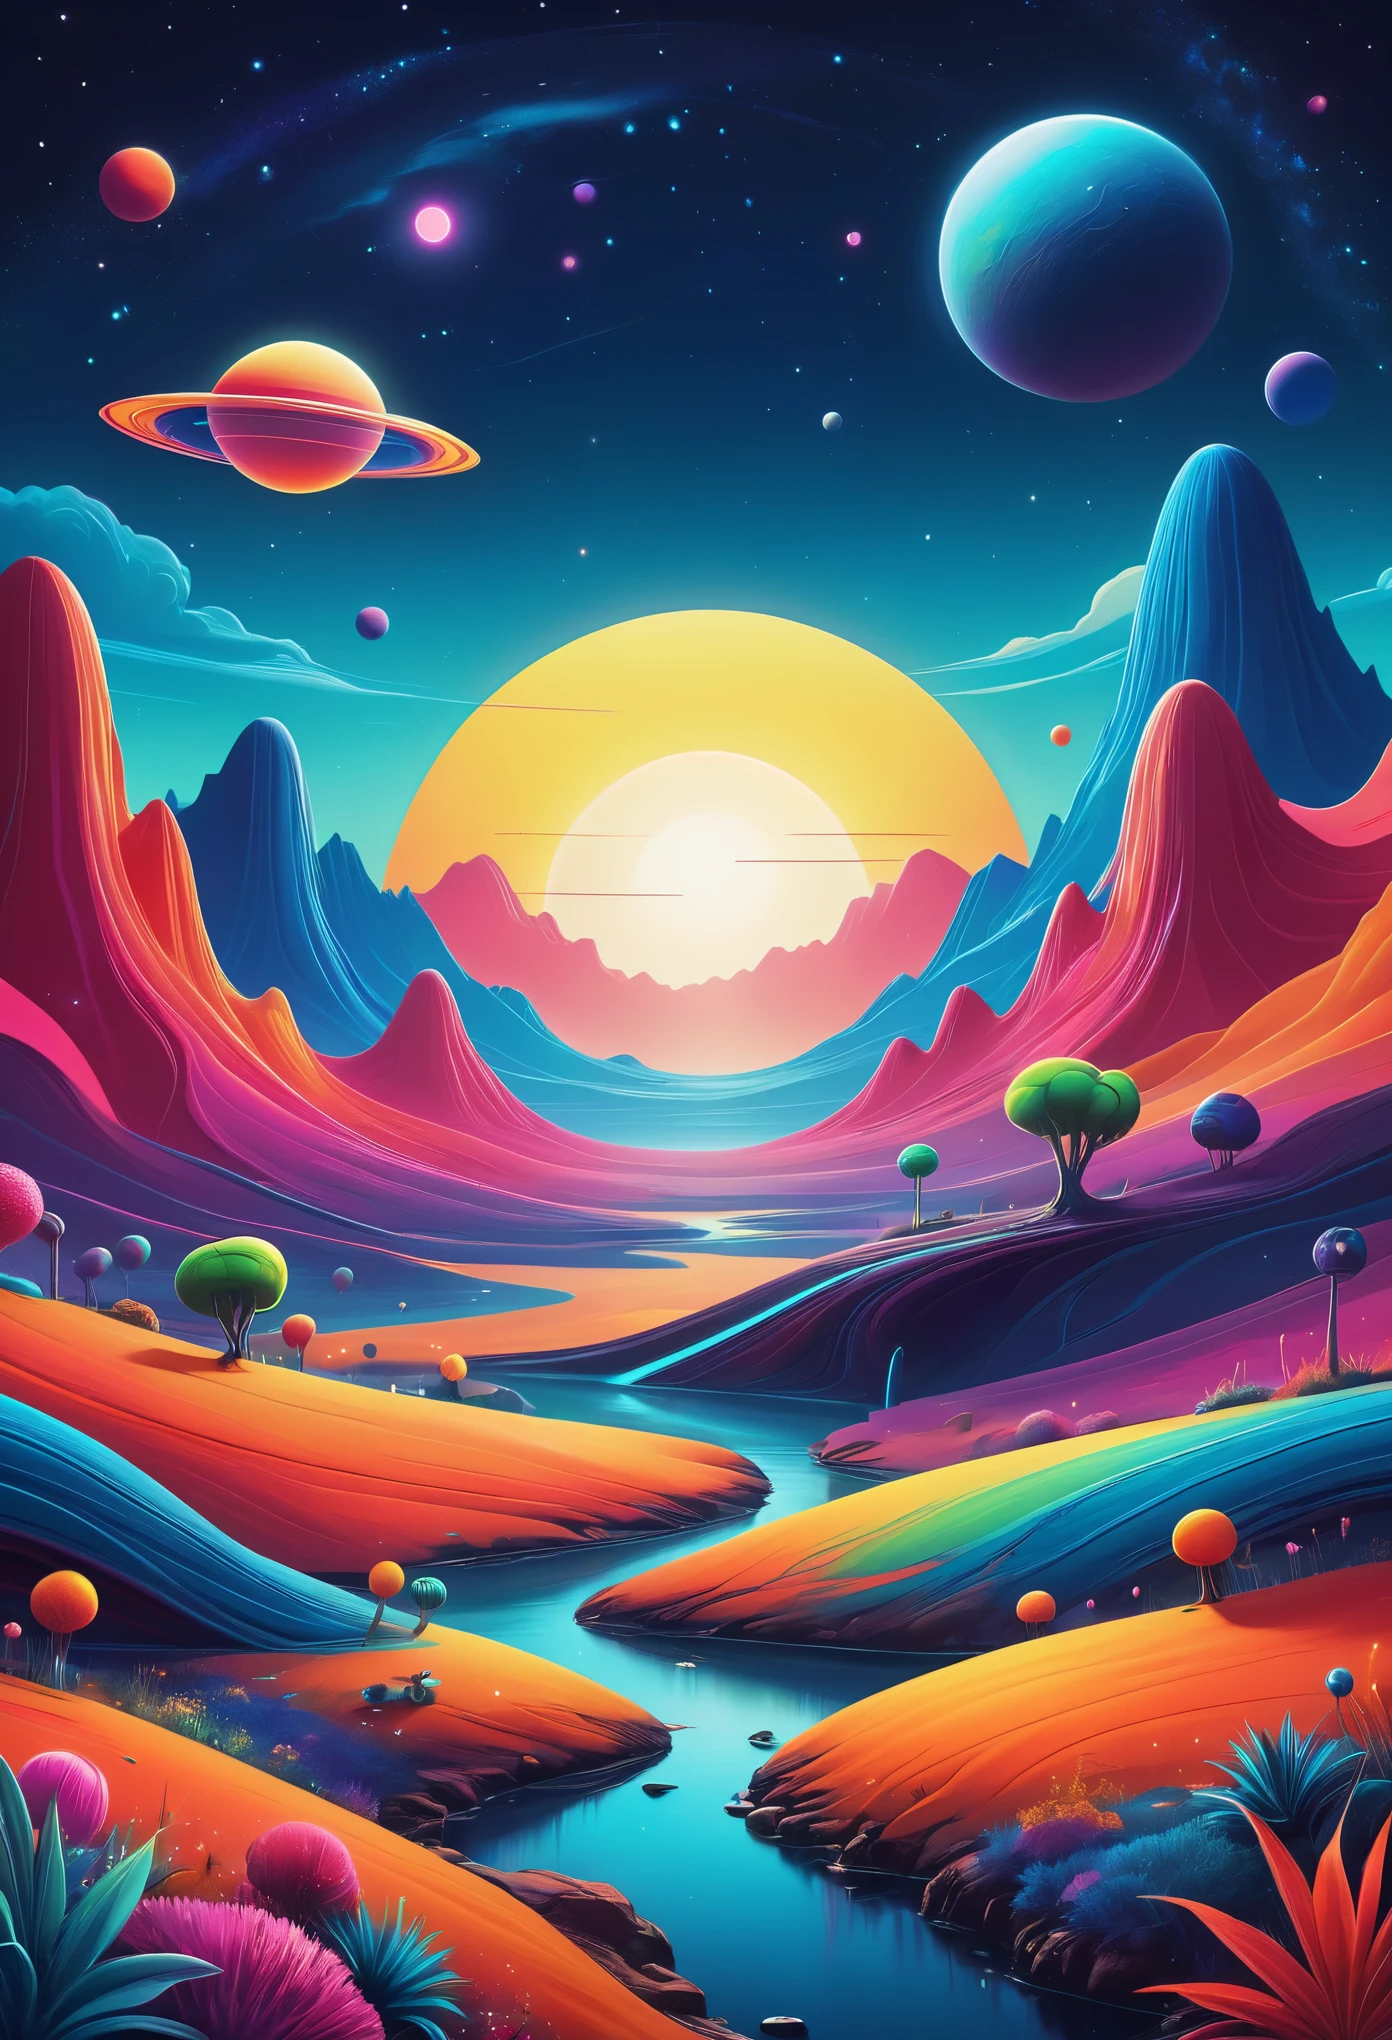 An 外星景观 bursting with vibrant colors and whimsical features would captivate the imagination in a POP Illustration. The scene would depict a 可爱的外星人 creature, 带圆形, 富有表现力的眼睛, 愉快地探索陌生的地形. The landscape would be adorned with 粗线, adding depth and dimension to the 丰富的色彩, 在宇宙启发的背景下. The overall effect would be a 当代艺术 杰作, 充满喜悦和惊奇, 邀请观众探索这个迷人世界的无限可能性. (LG), (杰作), 当代艺术, 彩色插图, 粗线, 丰富的色彩, 外星景观, 流行艺术, 可爱的外星人,